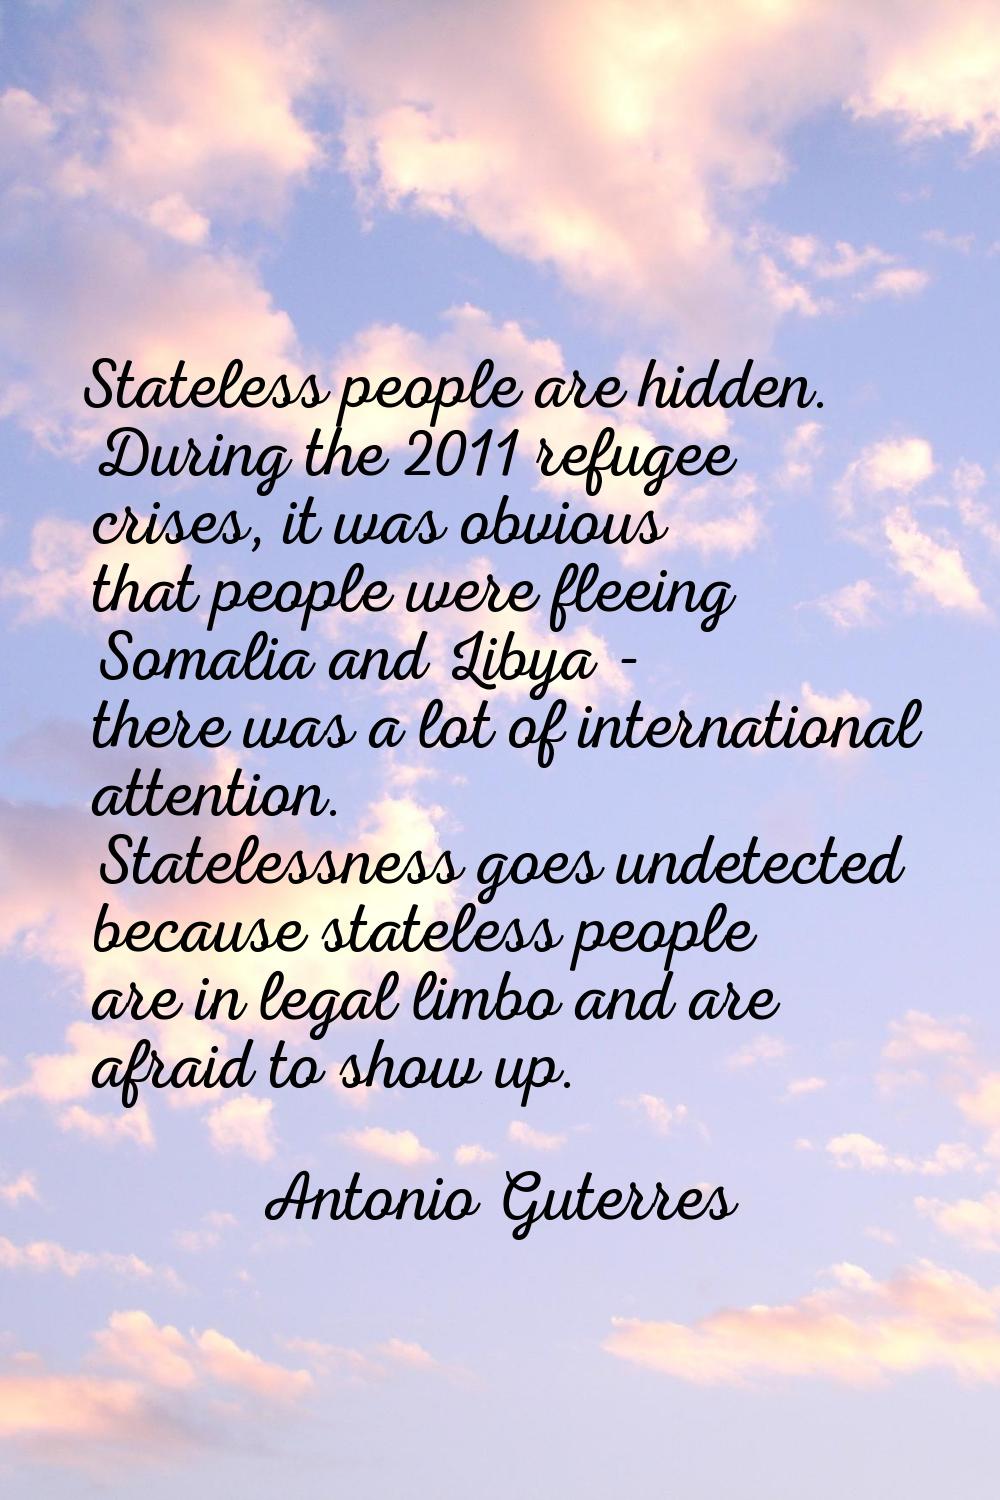 Stateless people are hidden. During the 2011 refugee crises, it was obvious that people were fleein